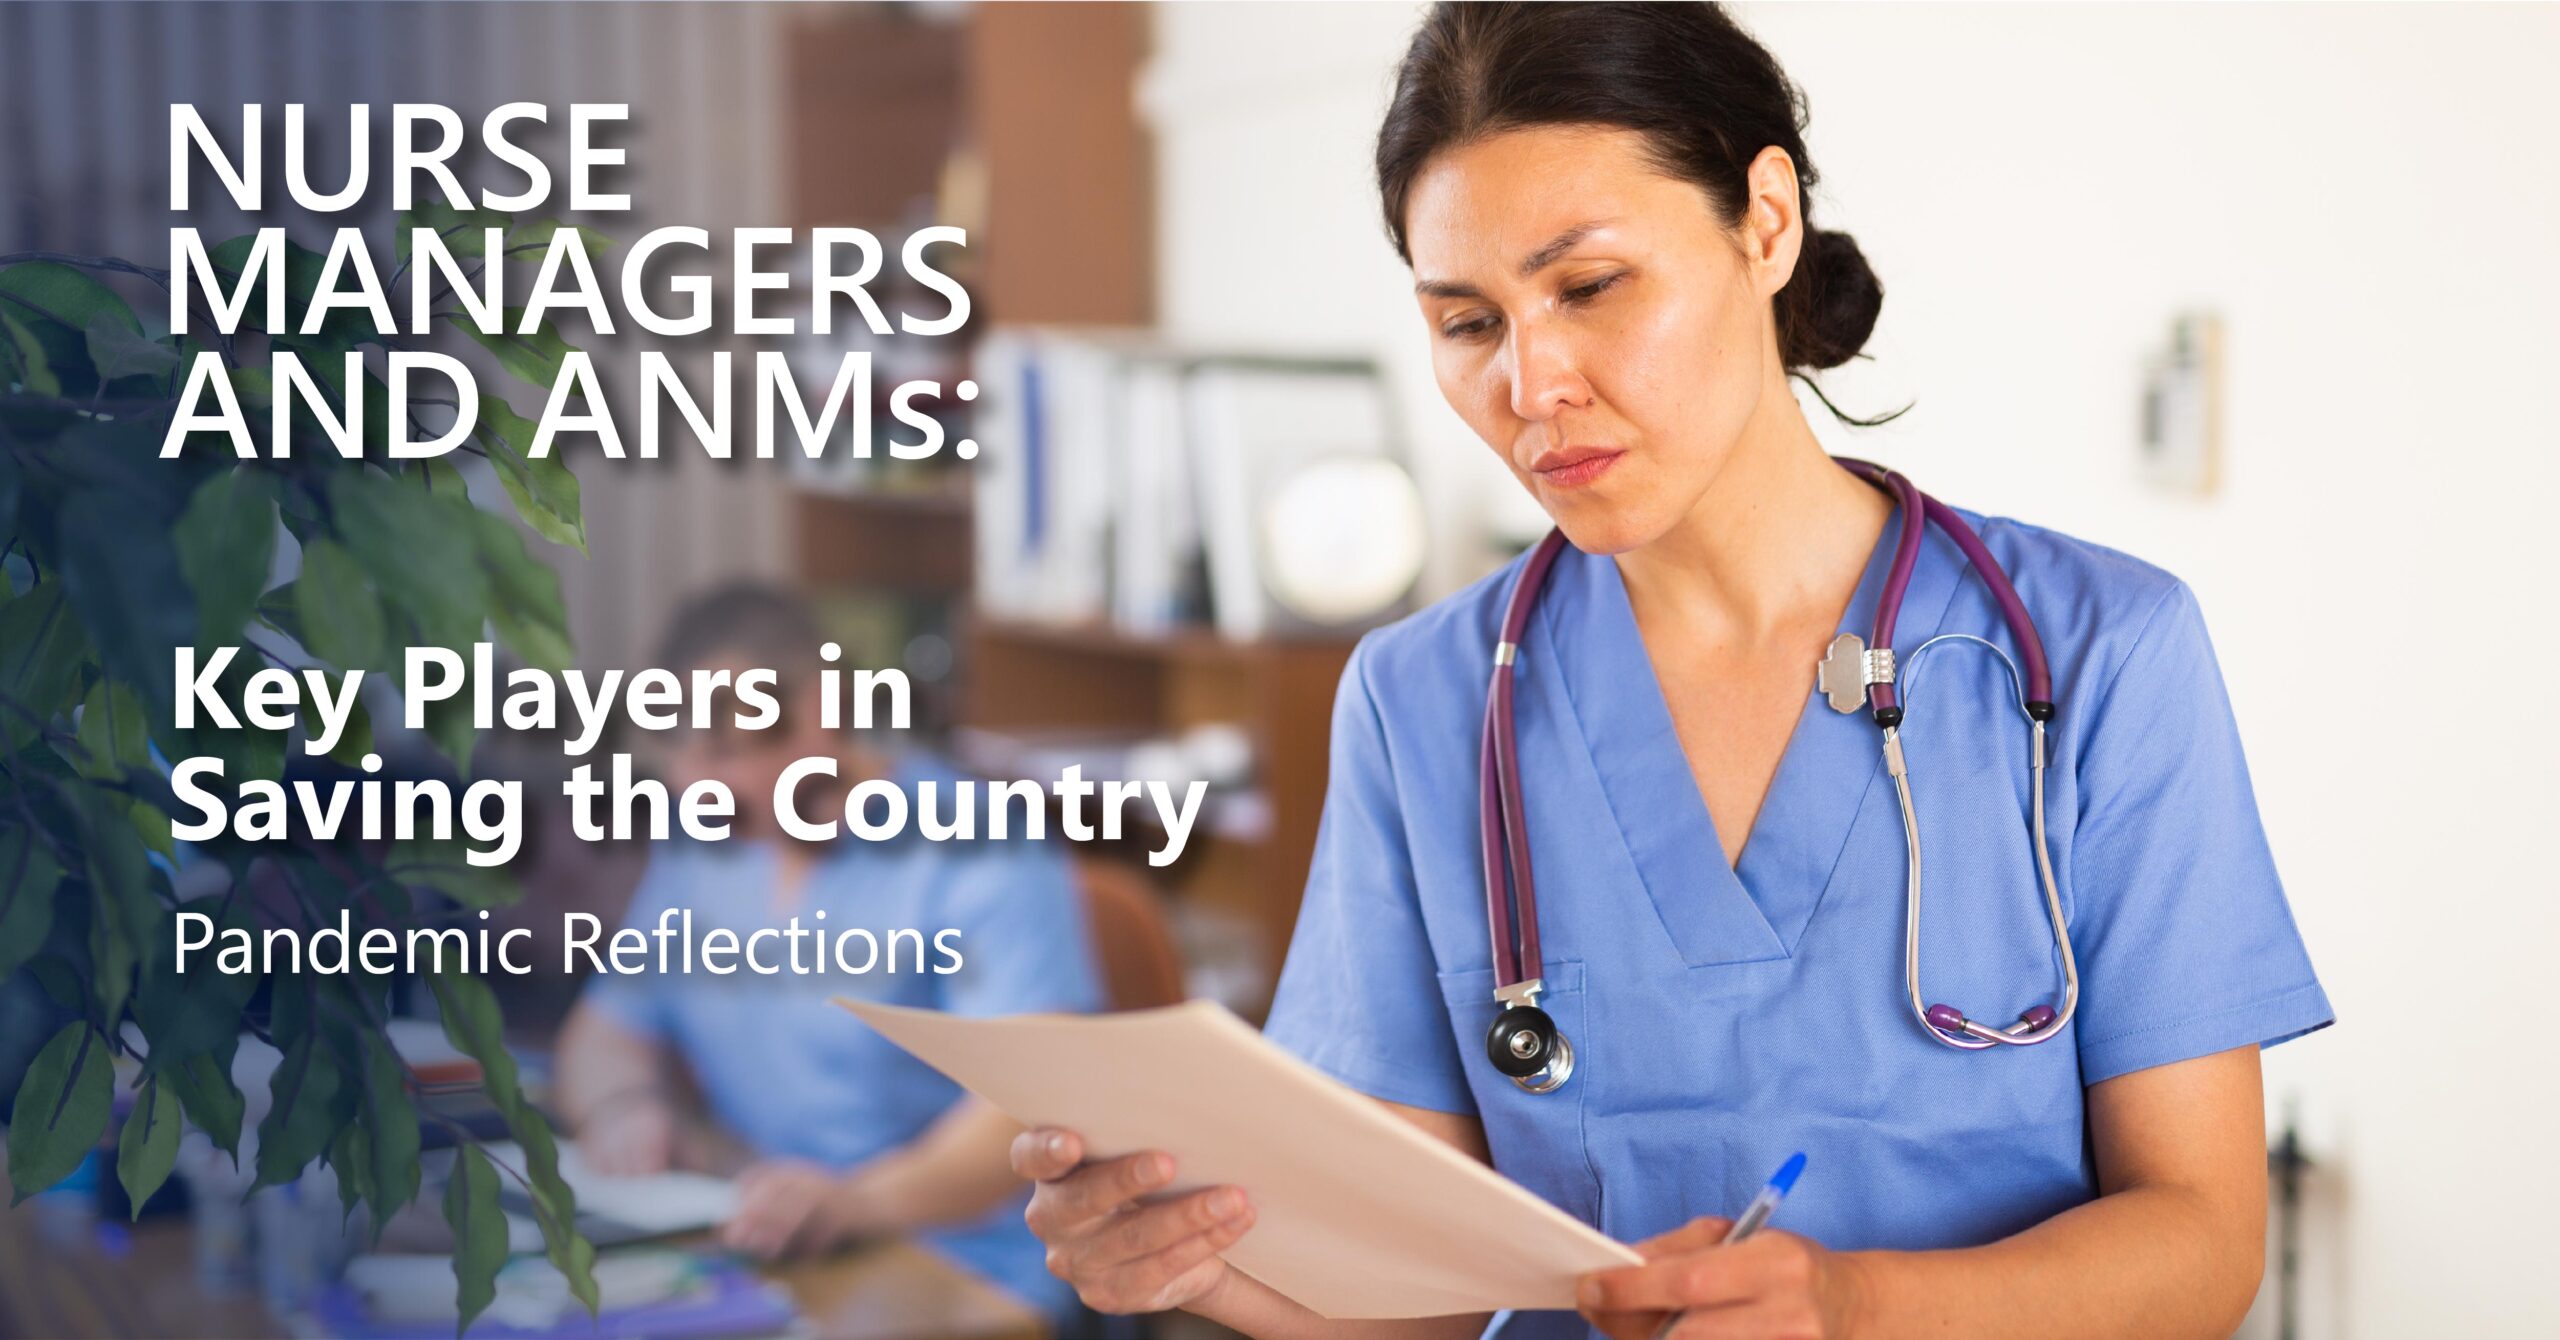 Nurse Managers and ANM’s: Key Players in Saving the Country. Pandemic Reflections